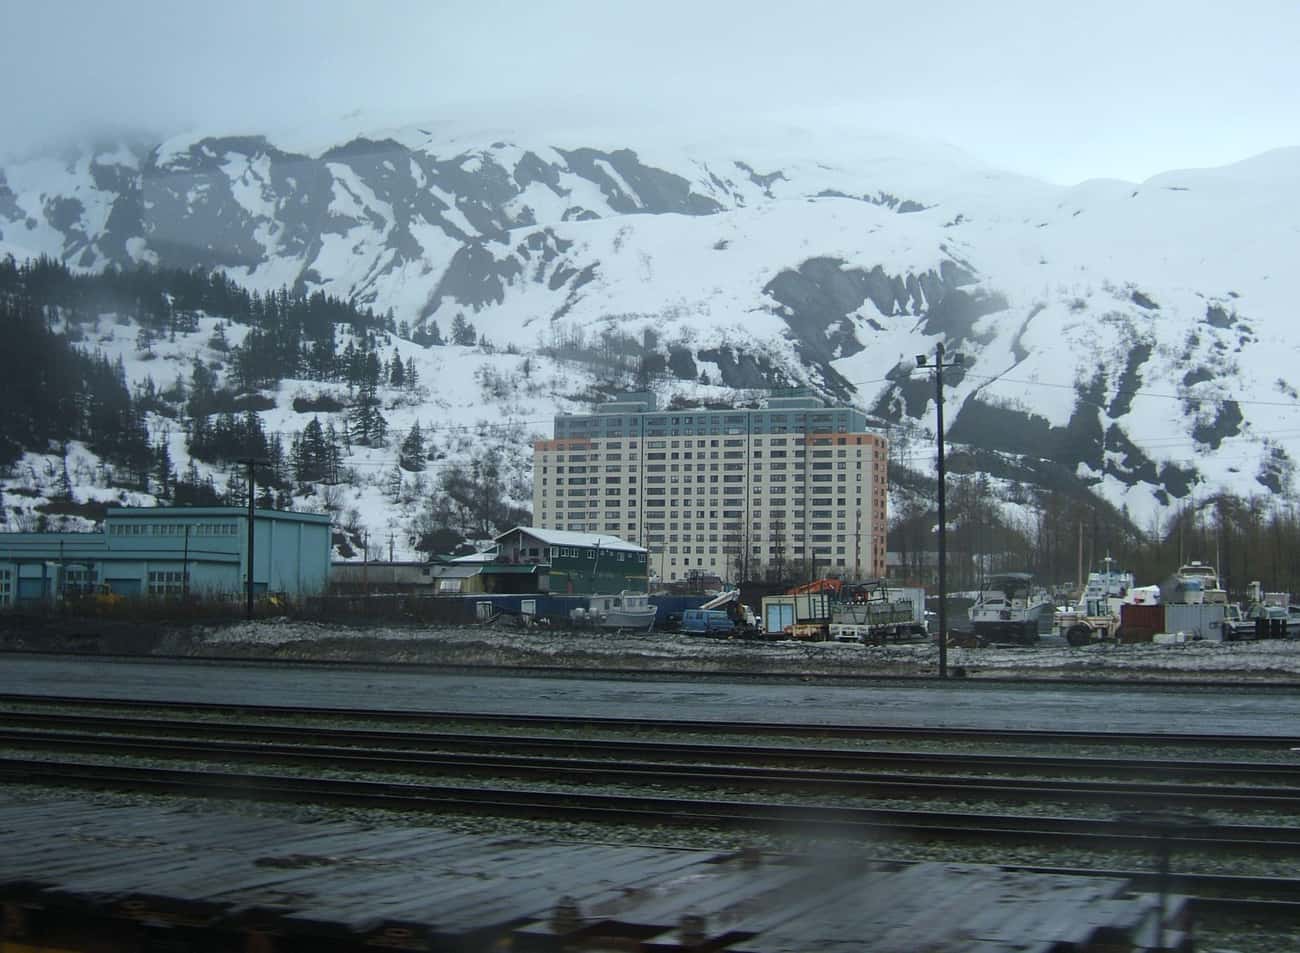 Whittier, AK – Everyone Lives In One Building